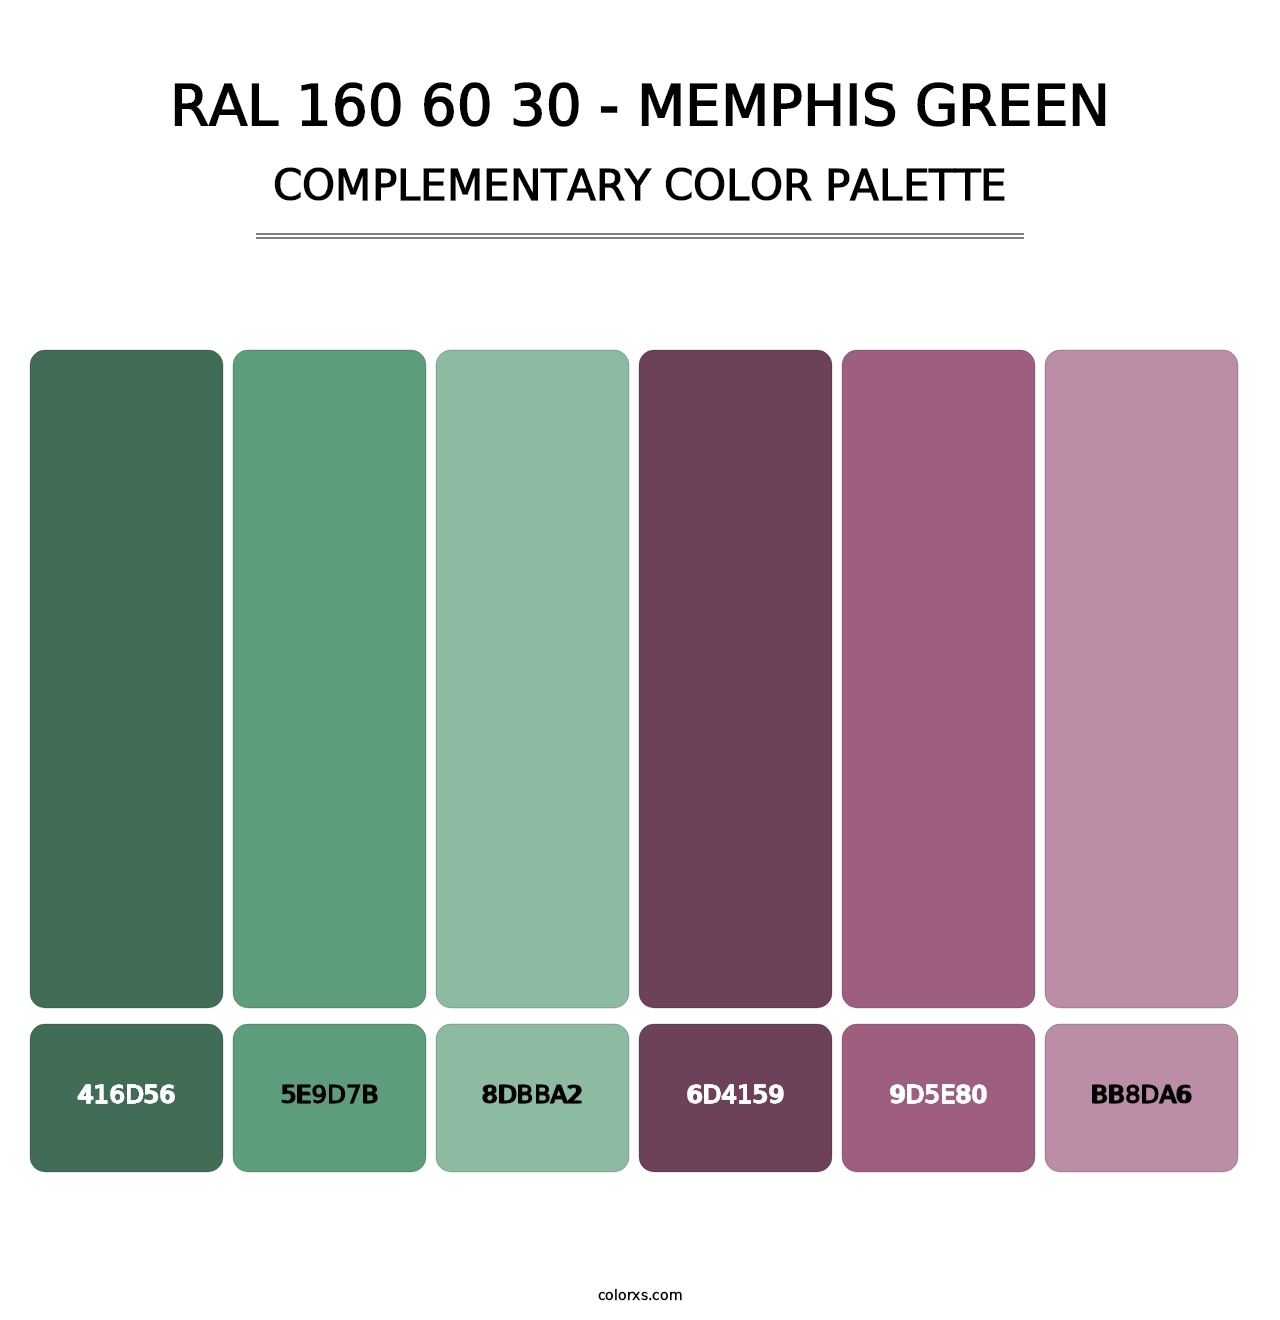 RAL 160 60 30 - Memphis Green - Complementary Color Palette